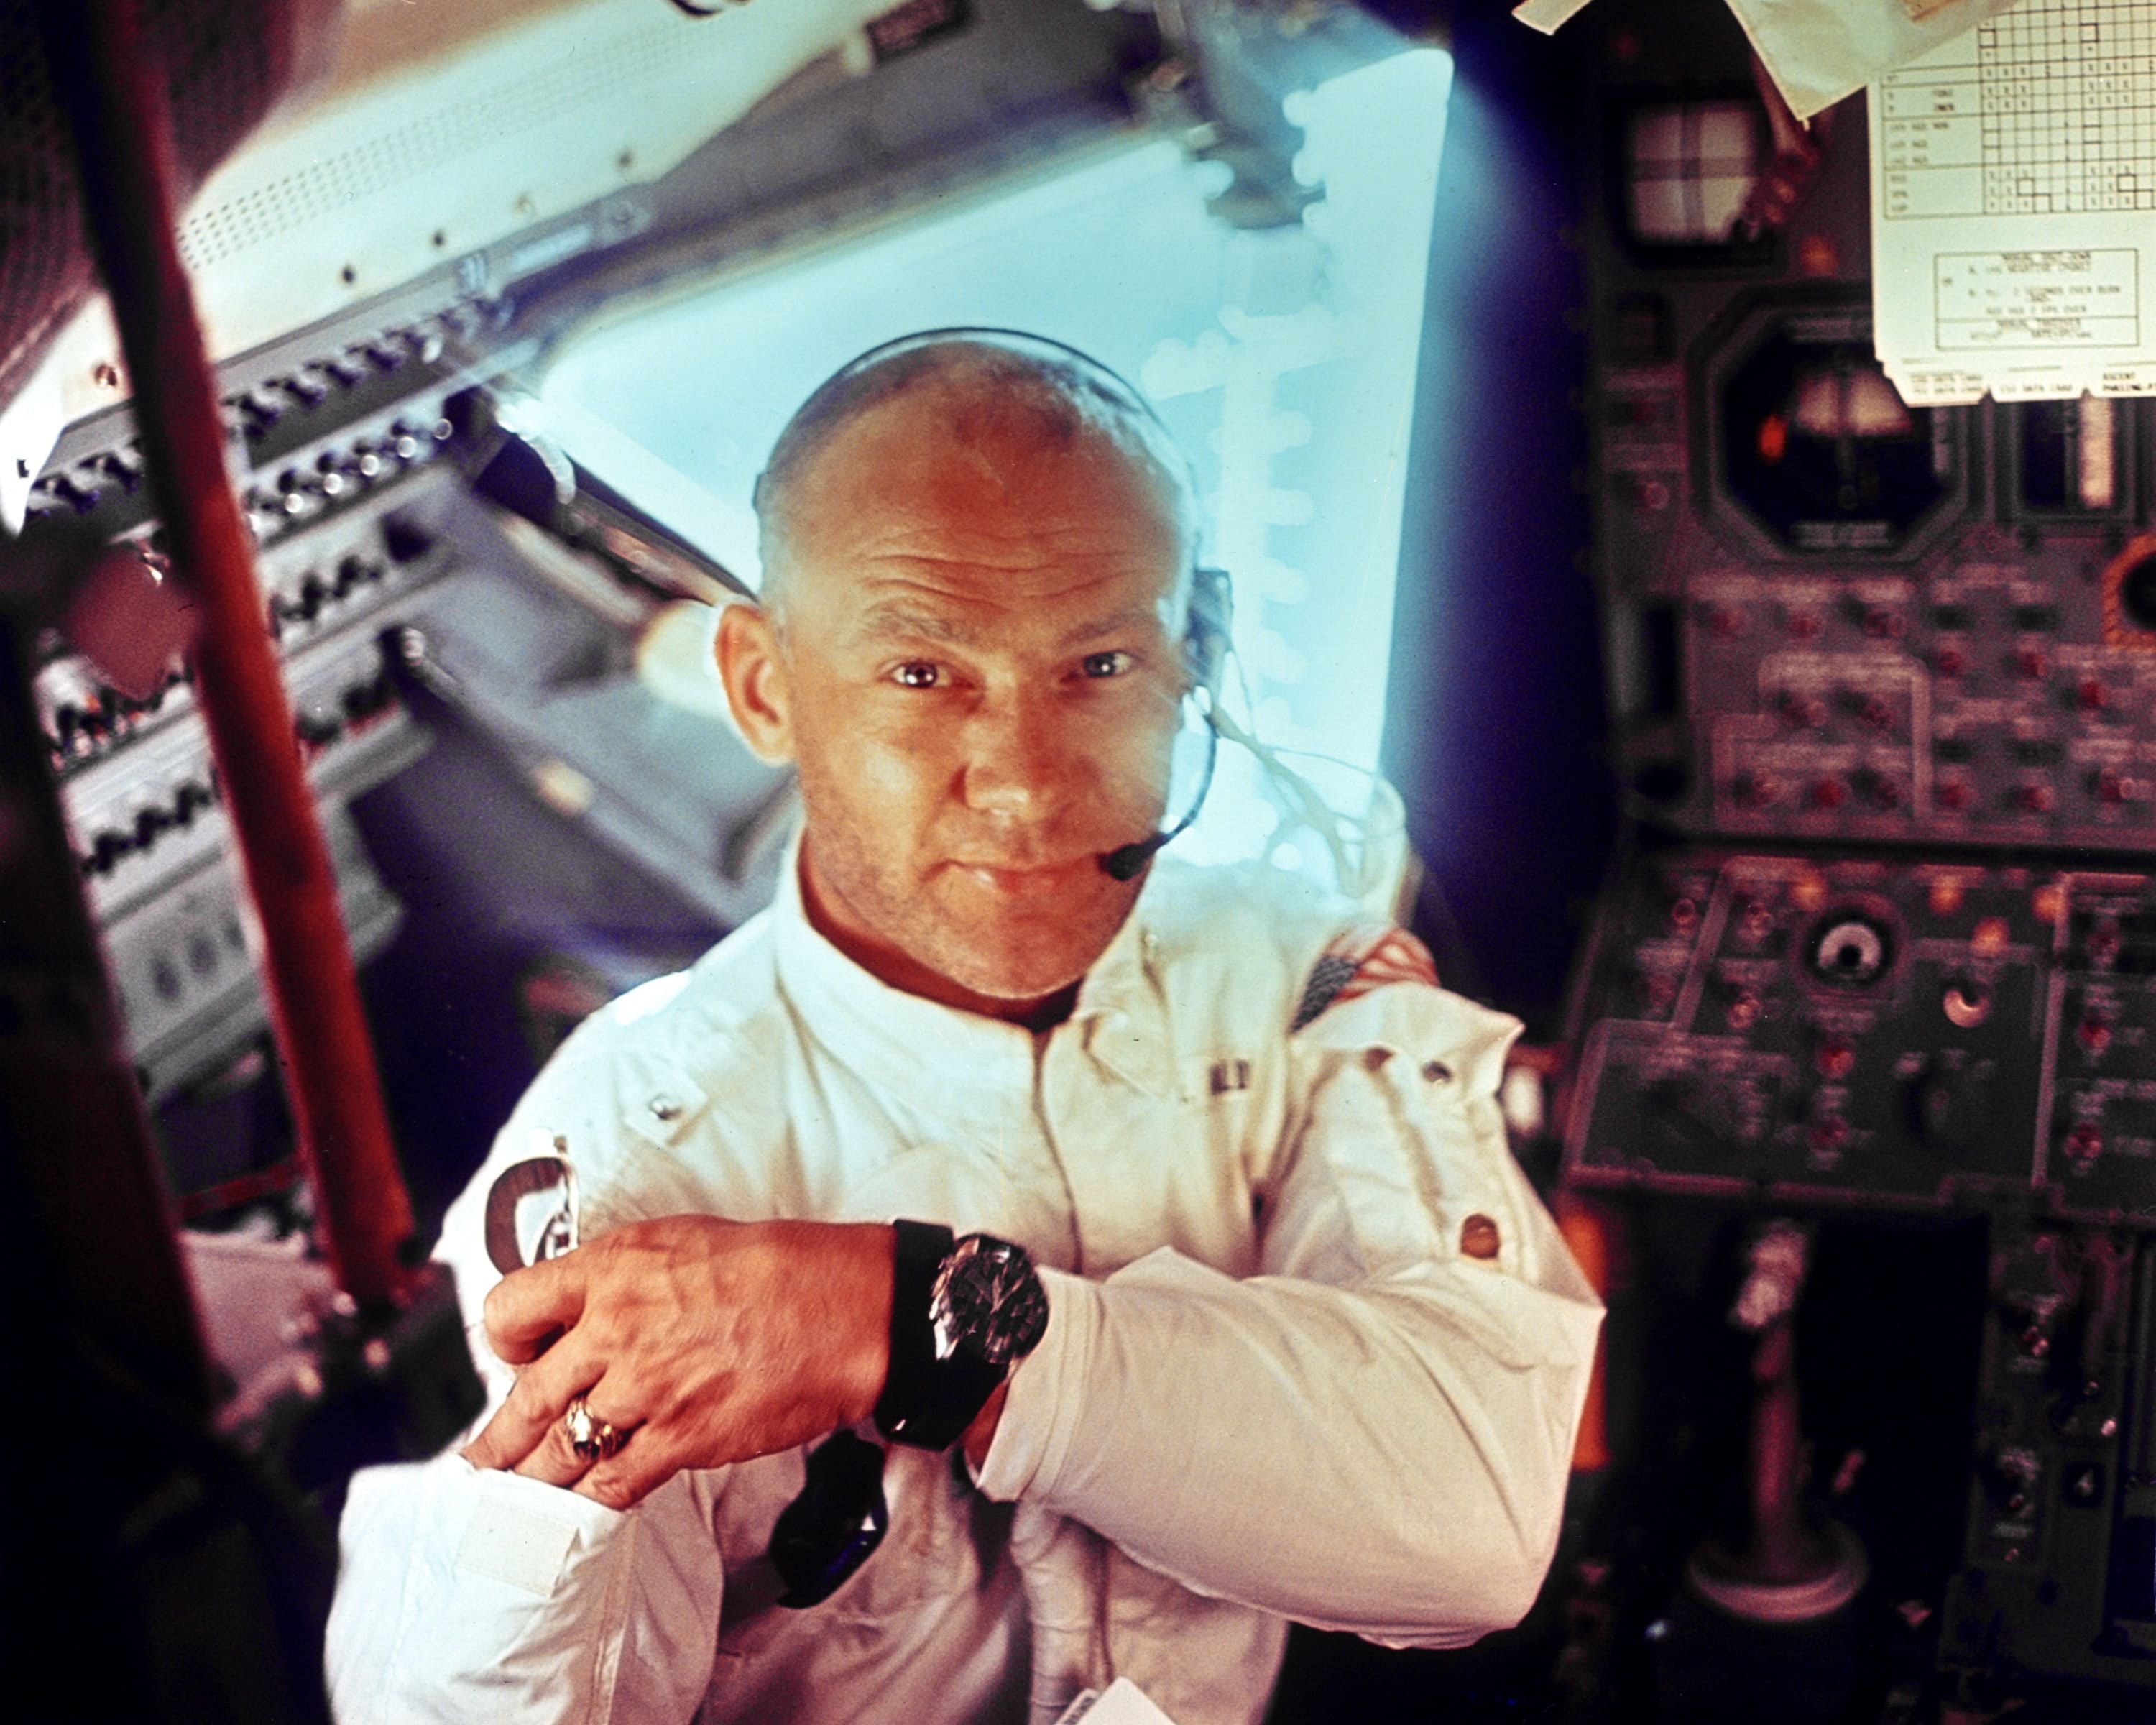 Article: Do Astronauts Wear Watches?